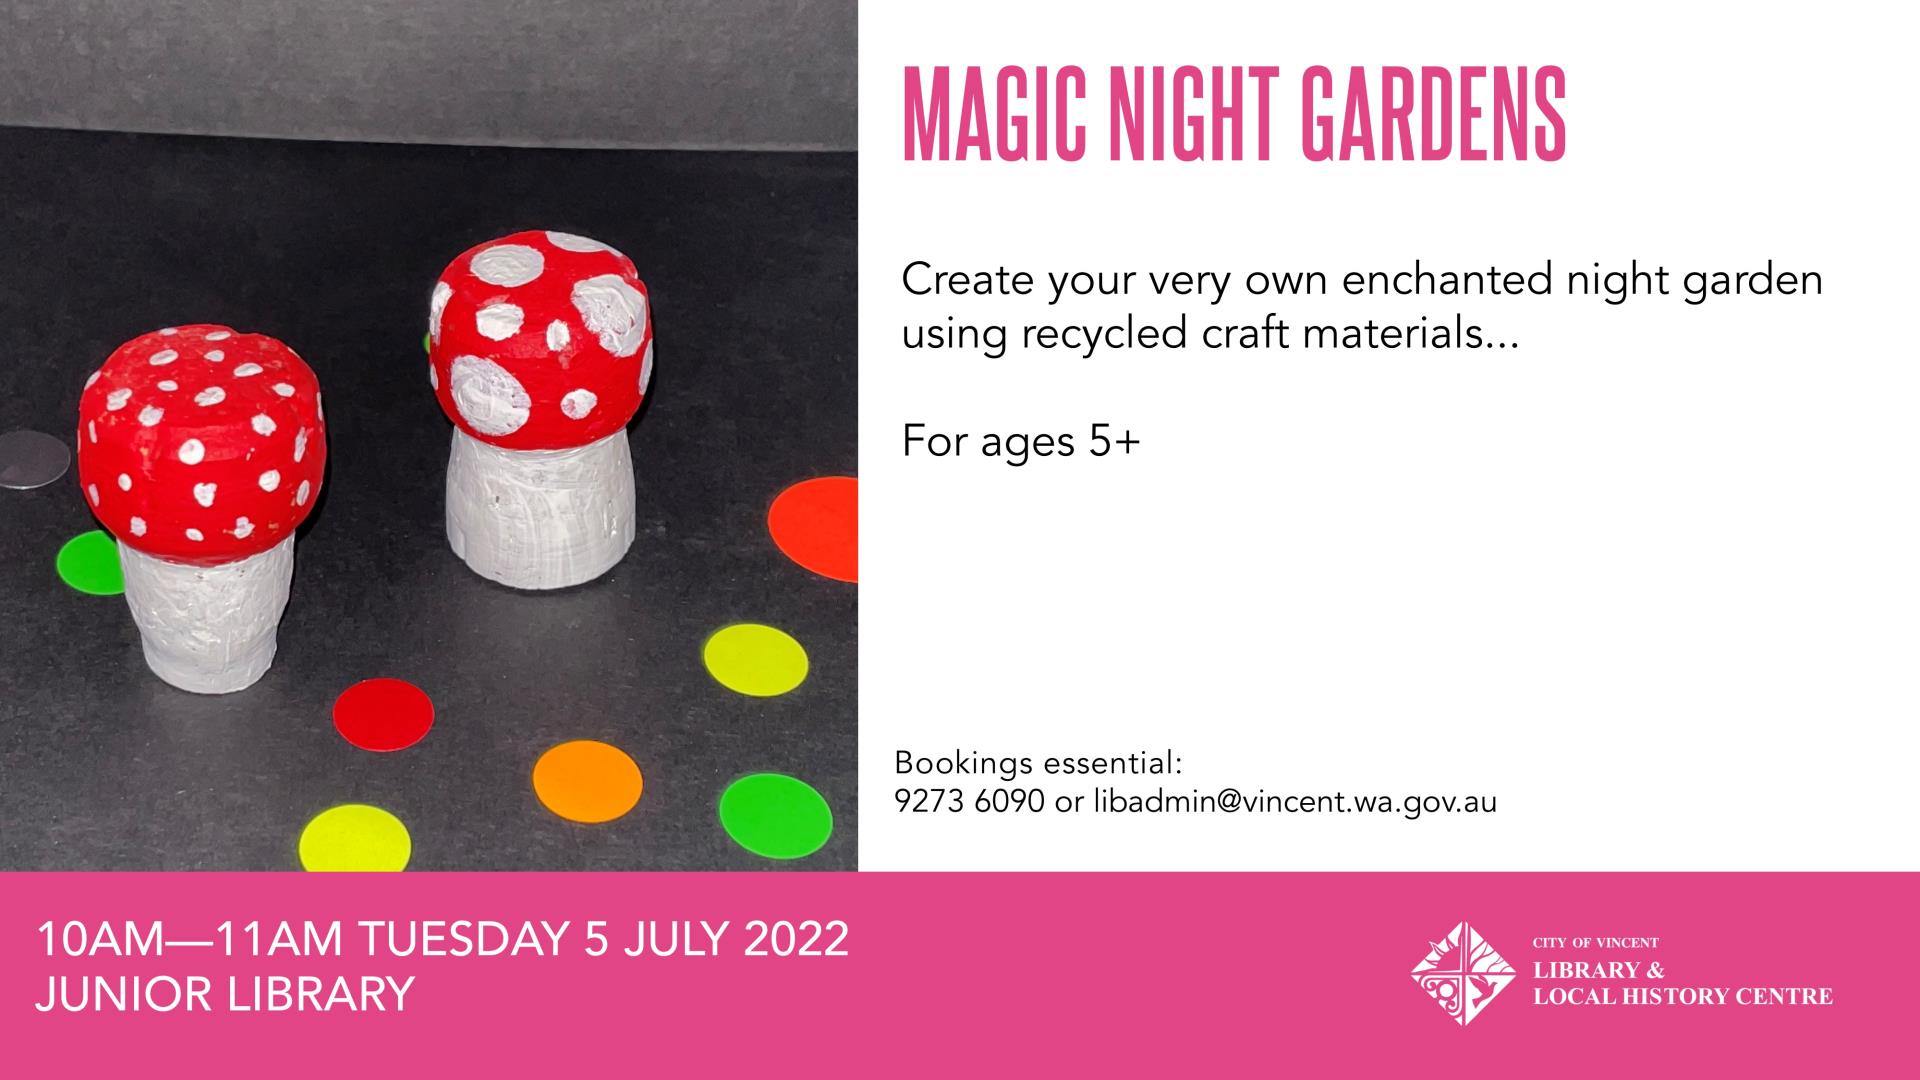 Magic Night Gardens school holiday activity poster with pink and black coloured background and a painted red and white cork mushroom